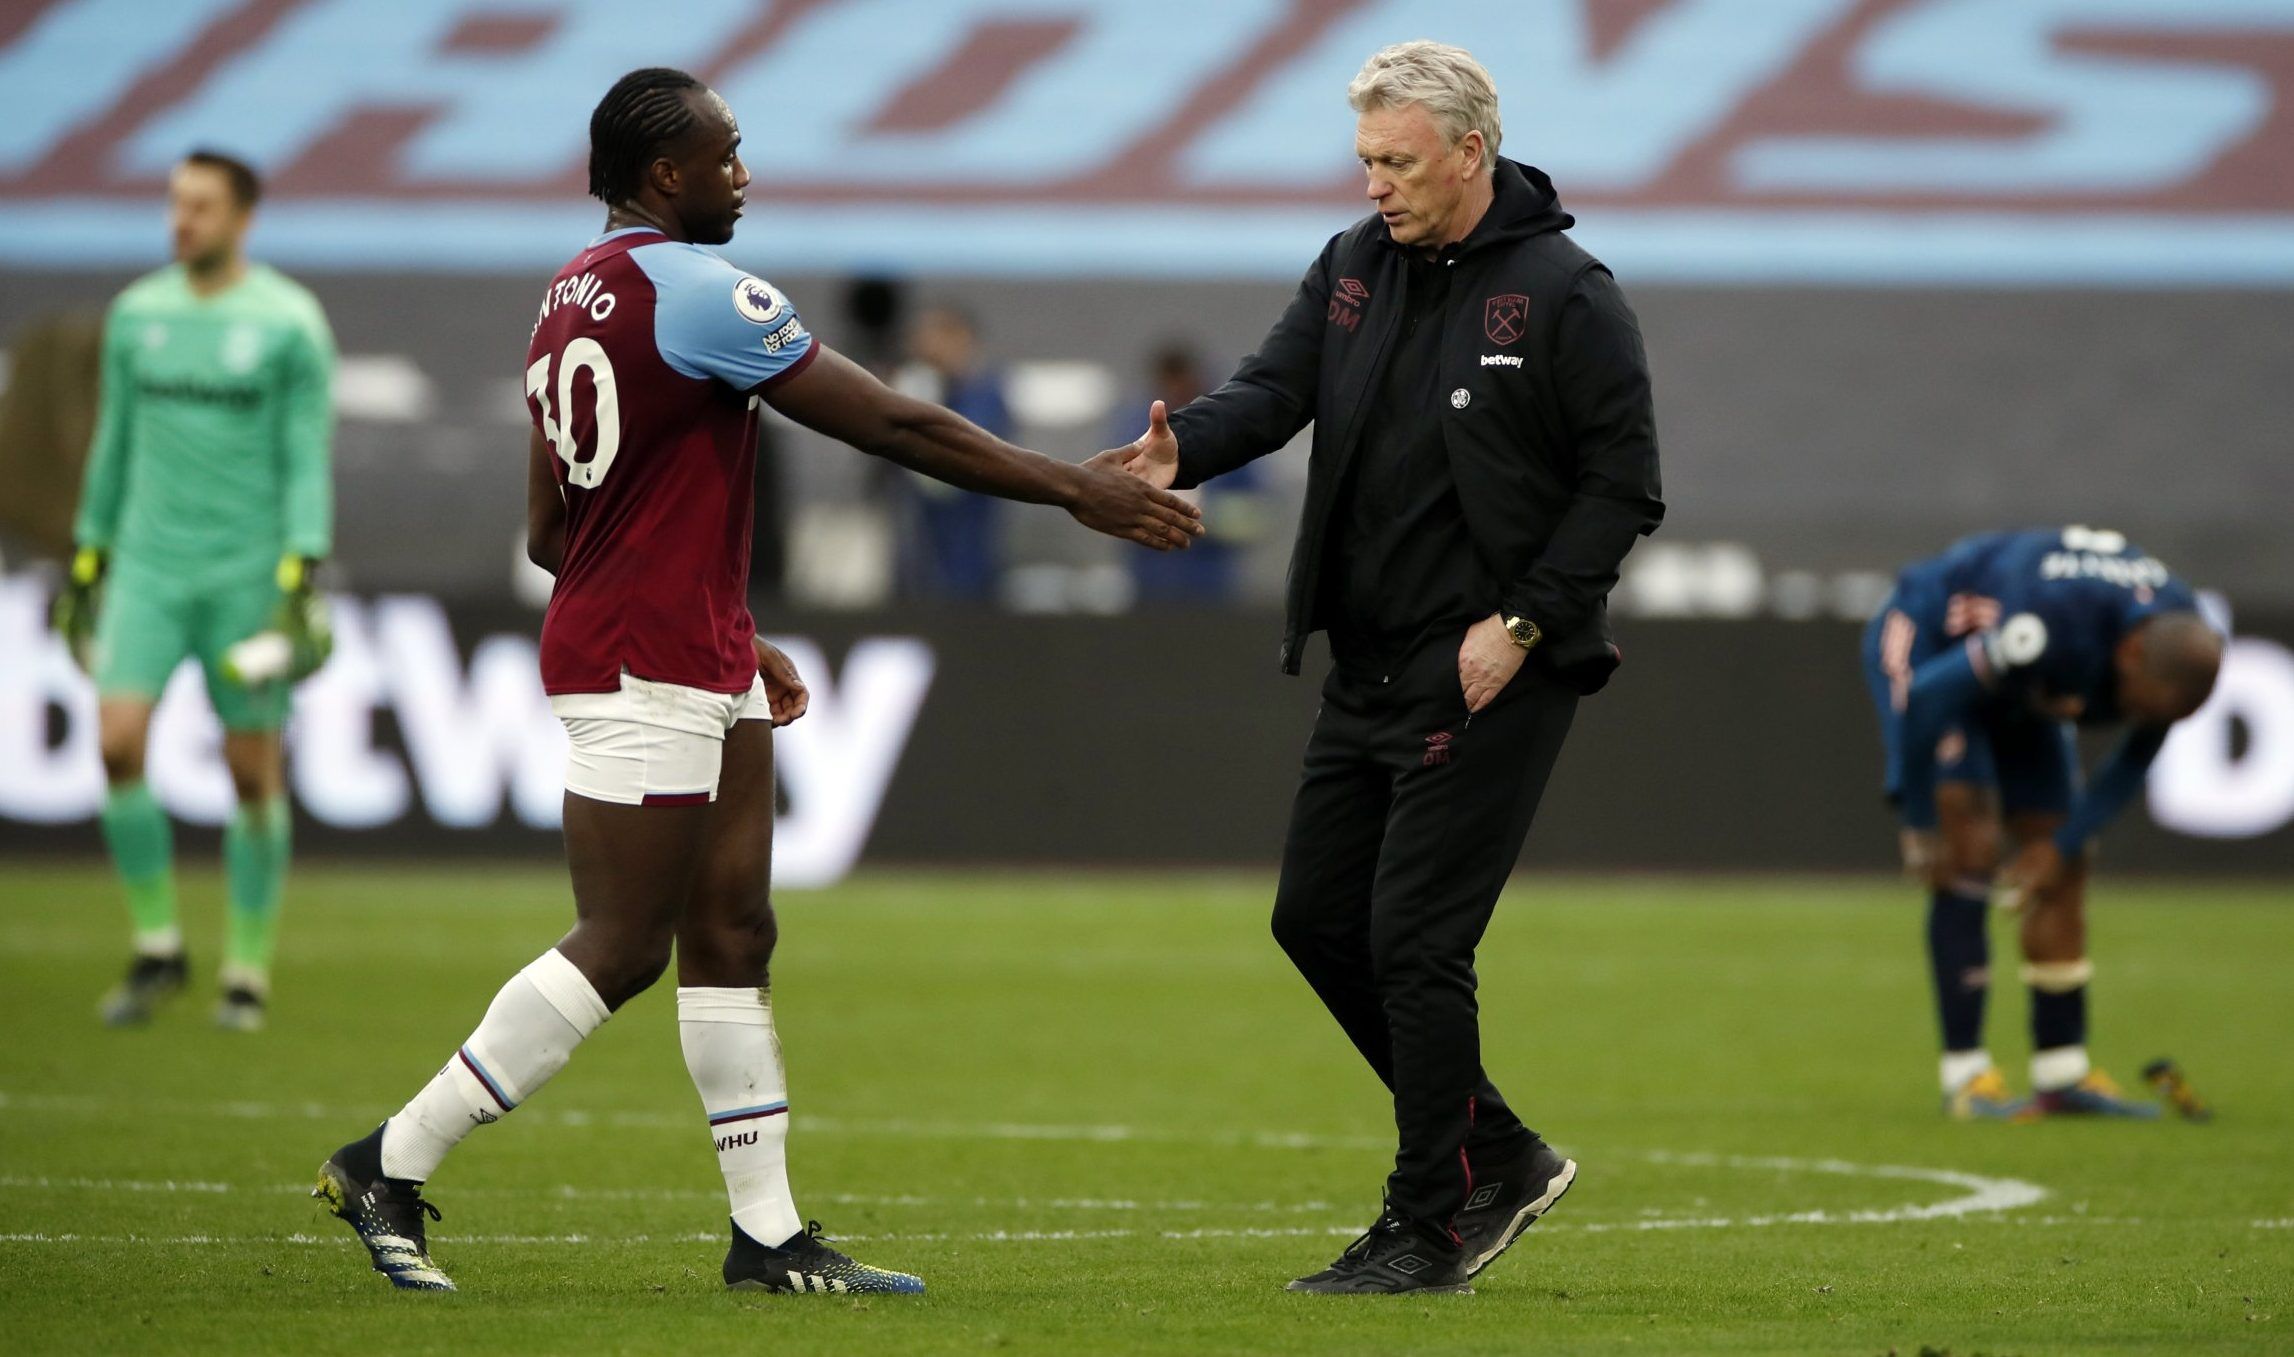 west ham manager david moyes with michail antonio after full-time against arsenal in the premier league